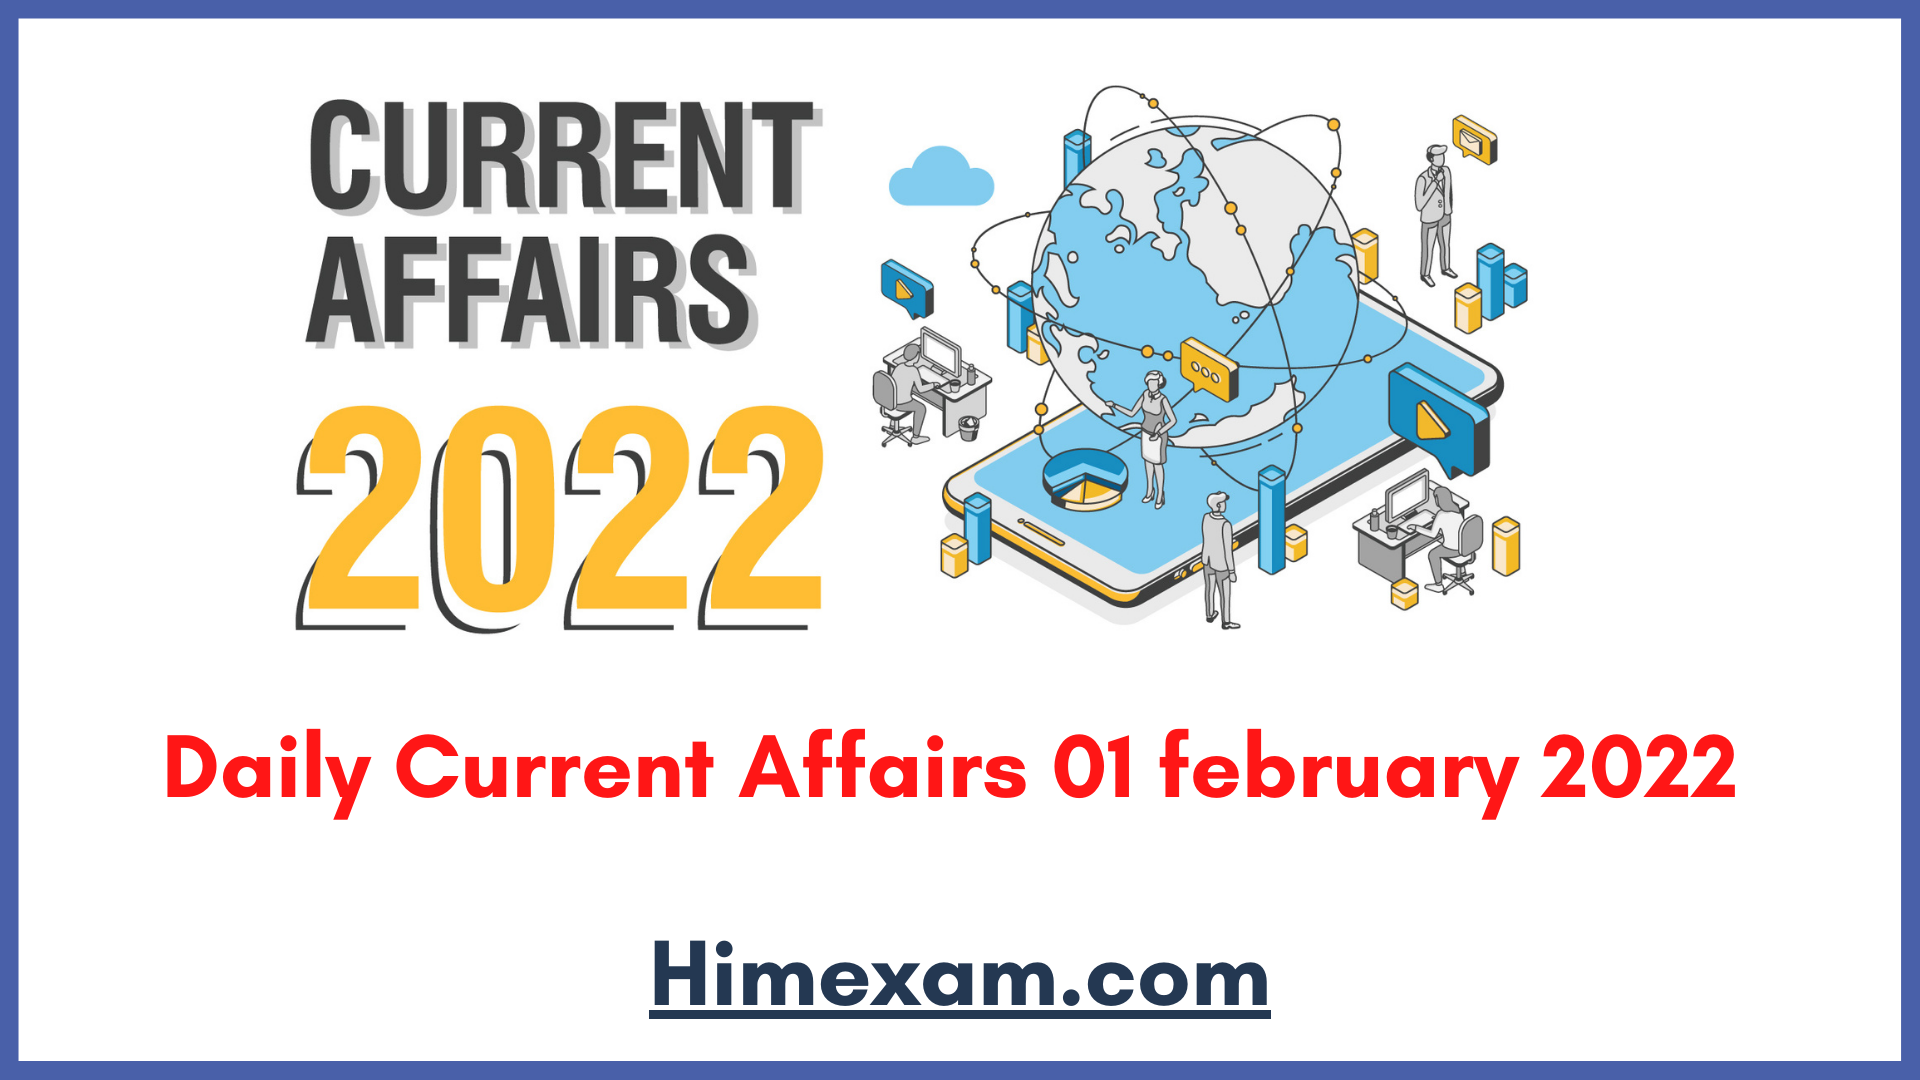 Daily Current Affairs 01 february  2022